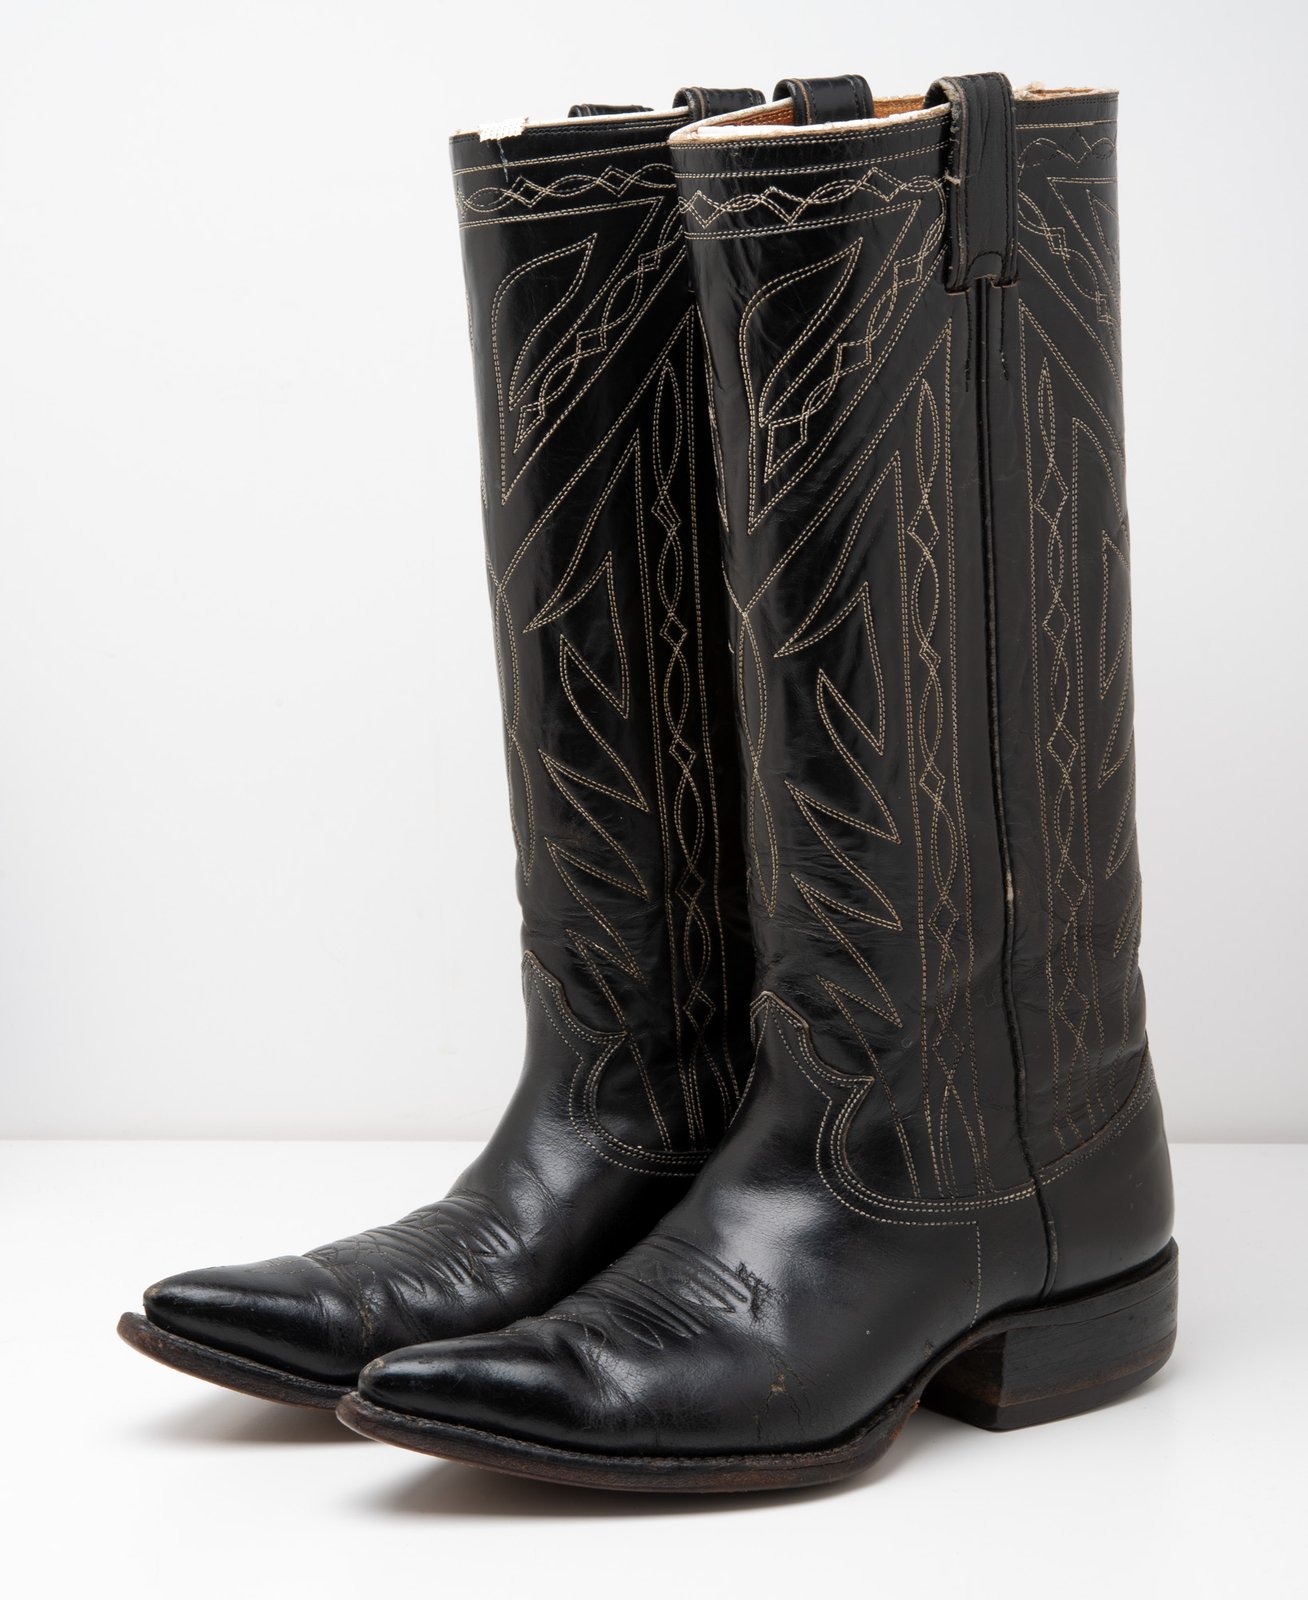 black boots with white stitching